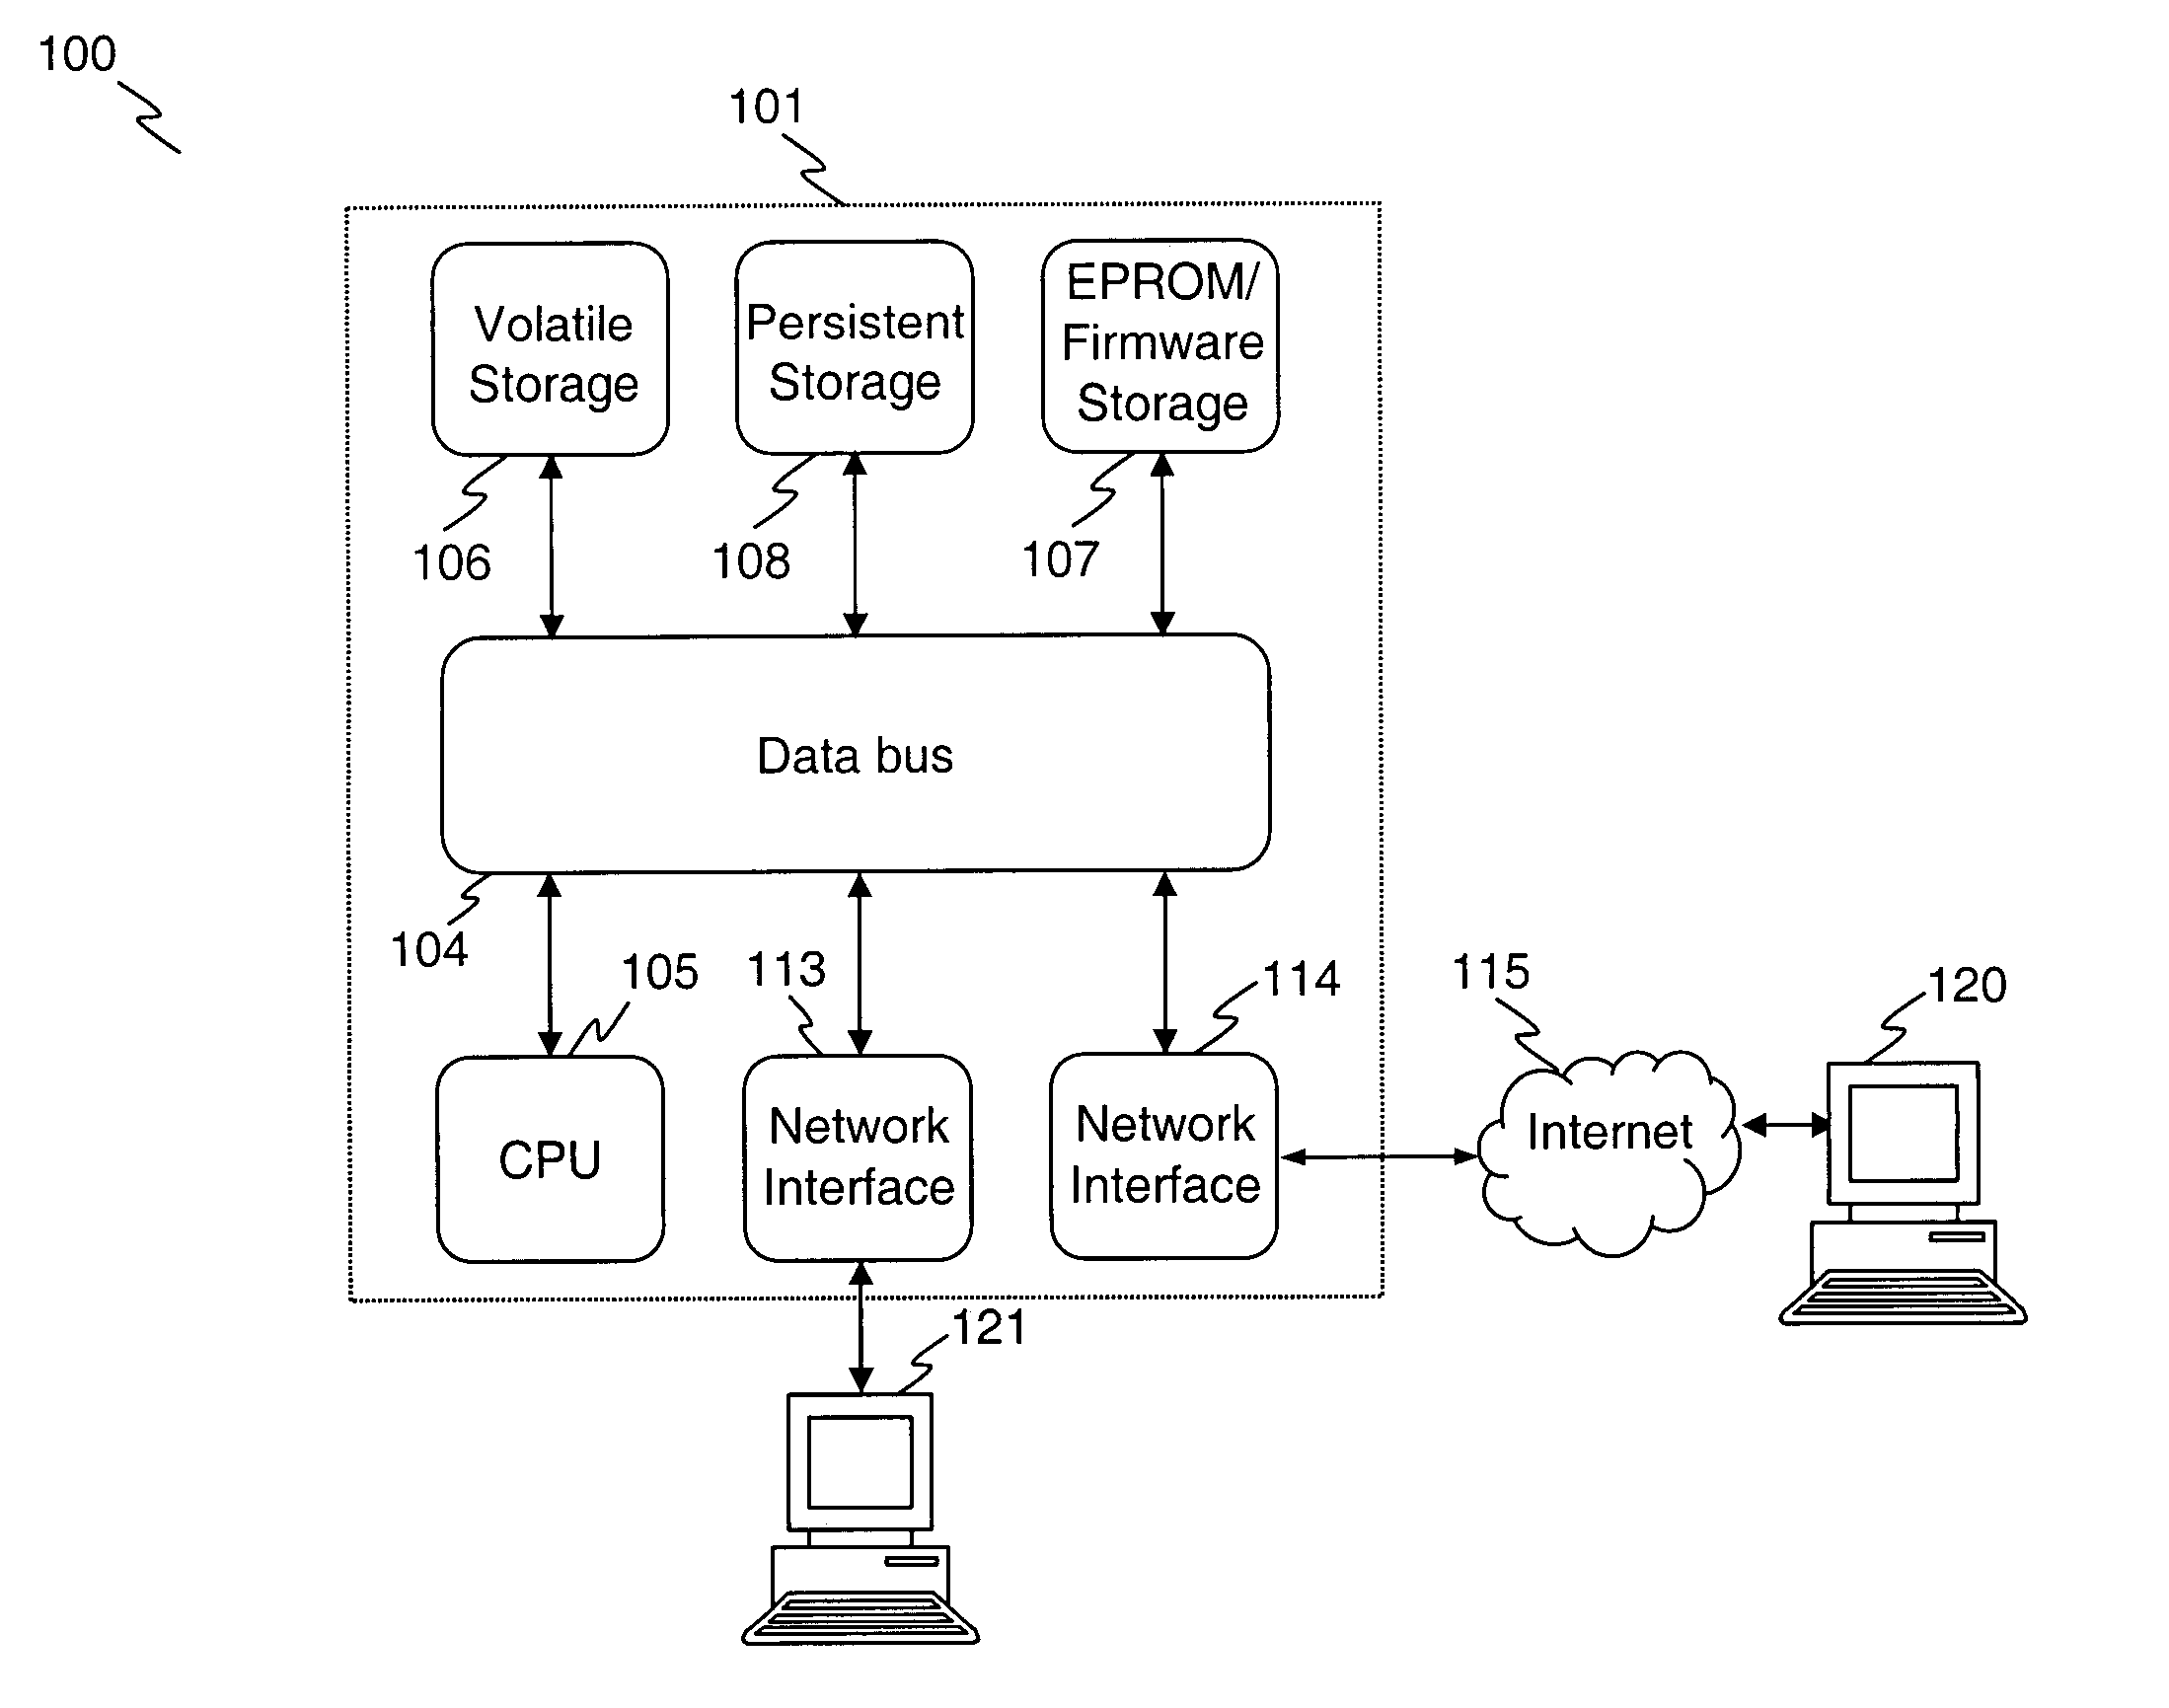 Apparatus and method for analyzing and filtering email and for providing web related services